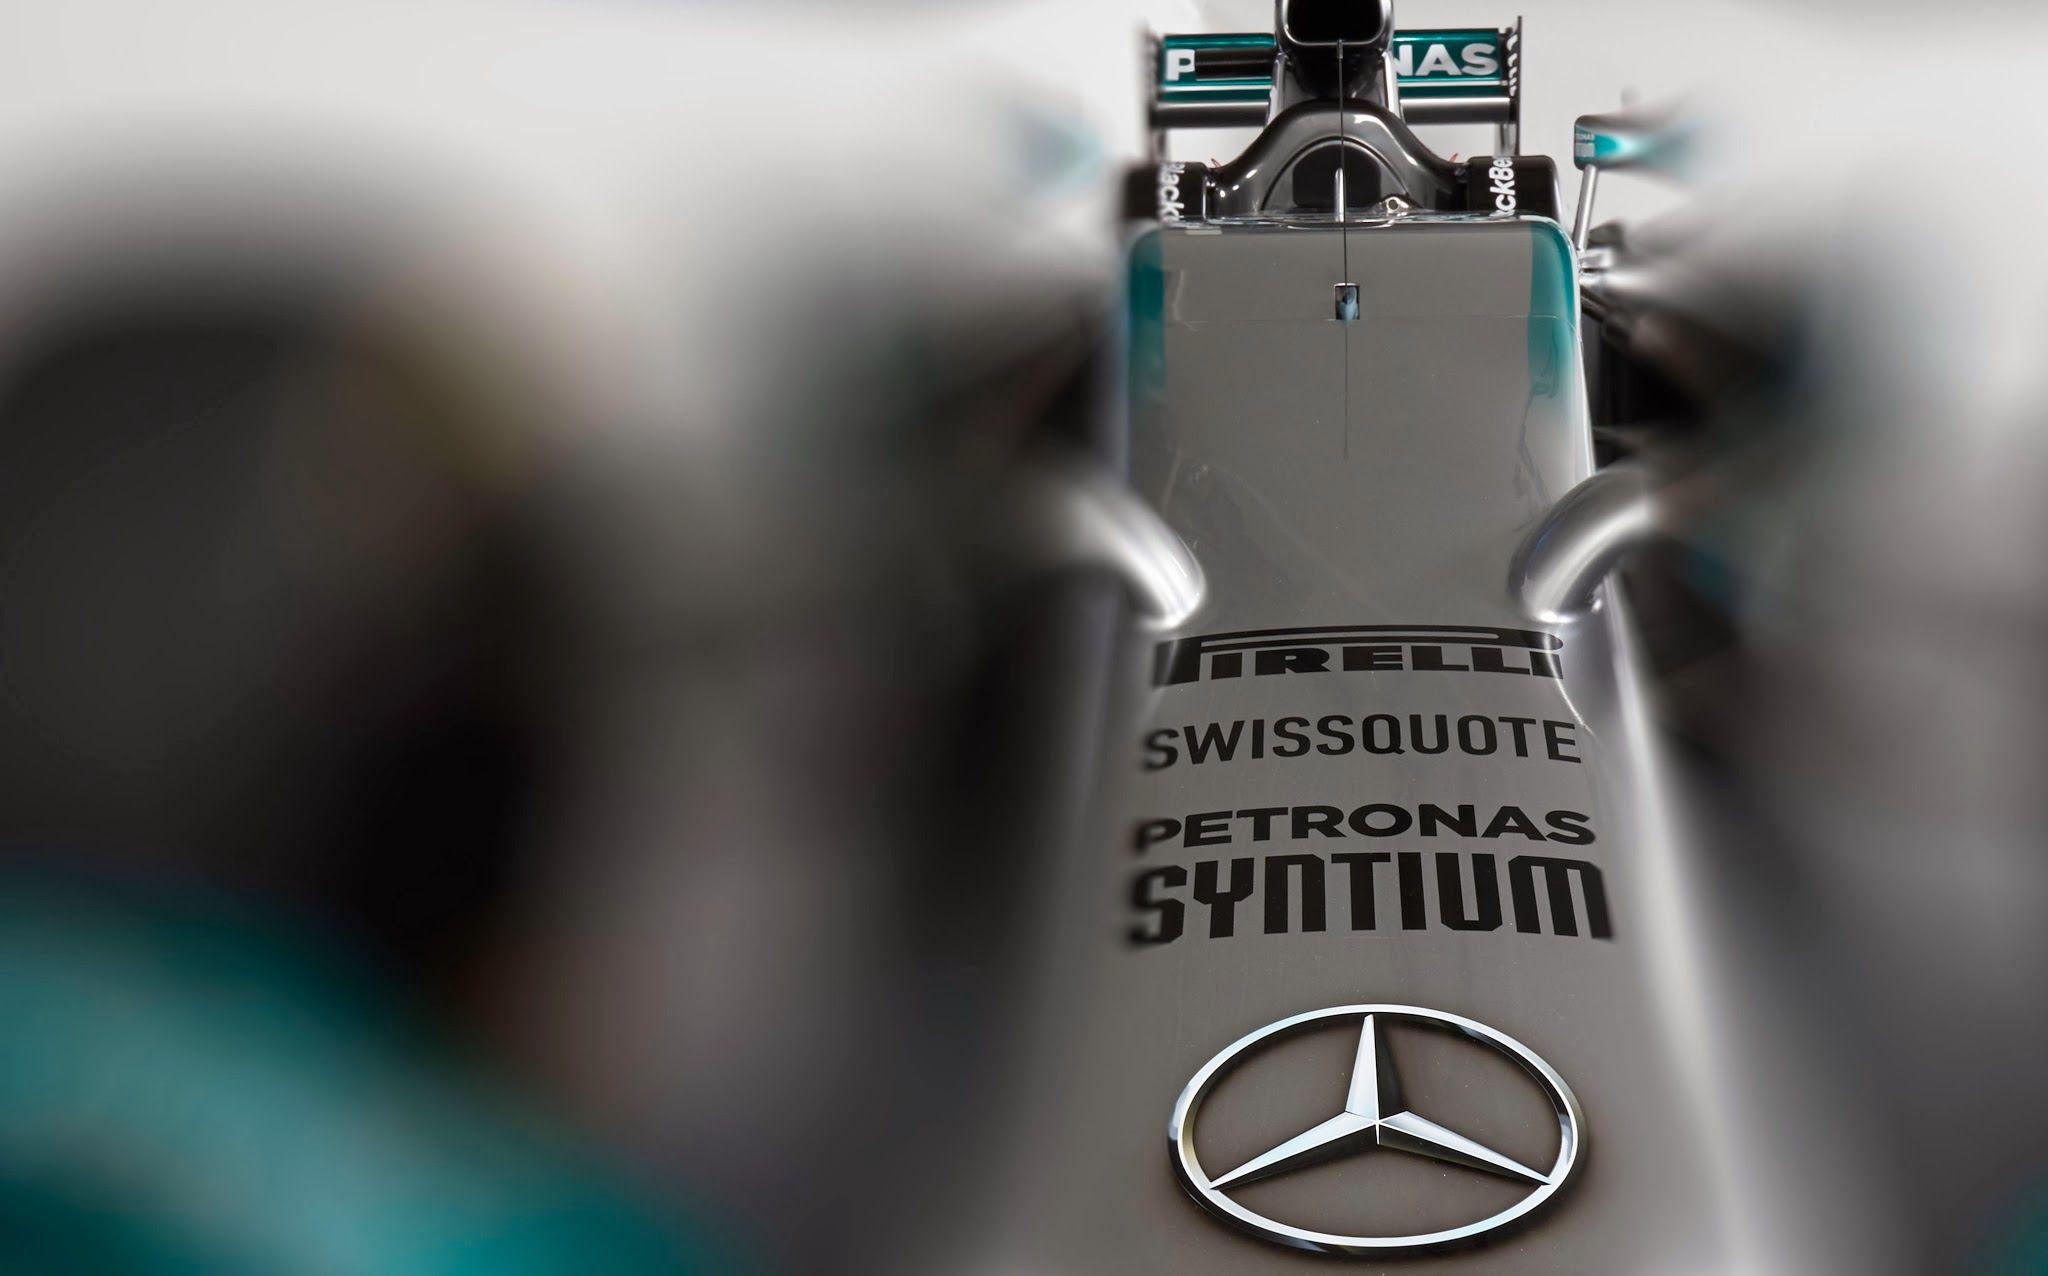 The Mercedes AMG Petronas W04 (partly) unveiled today updated